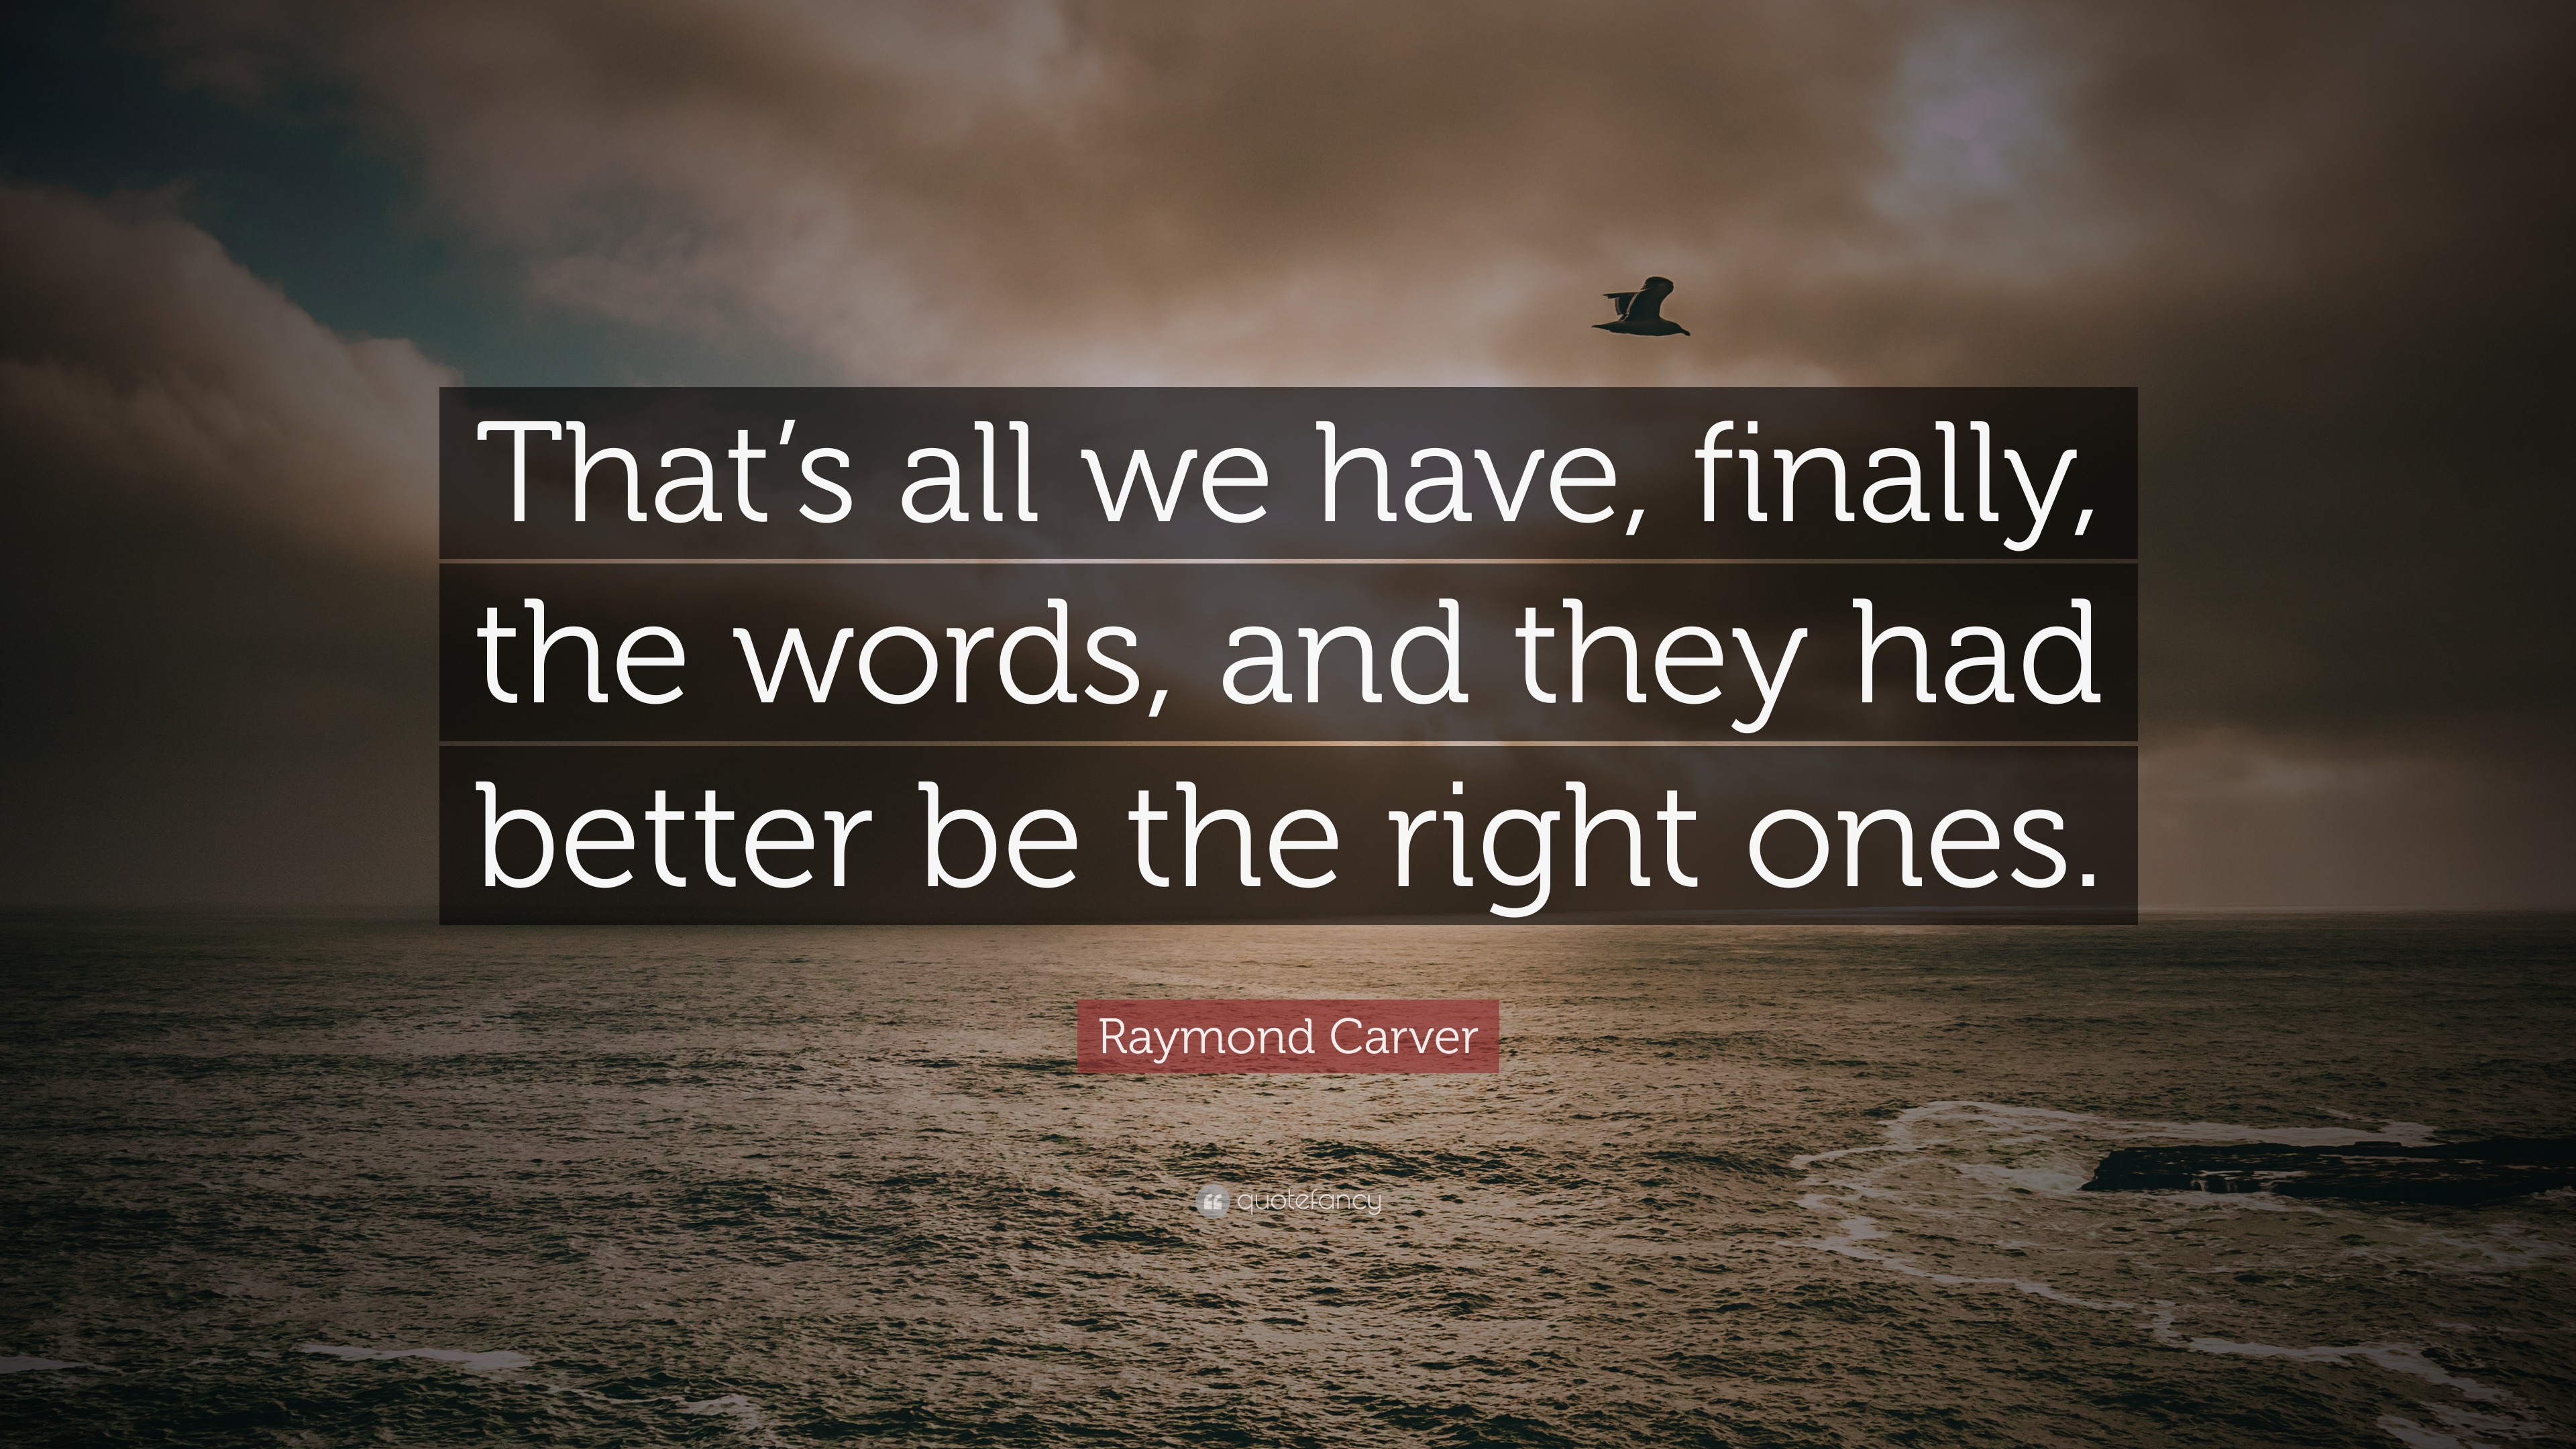 Raymond Carver Quotes (65 wallpapers) - Quotefancy